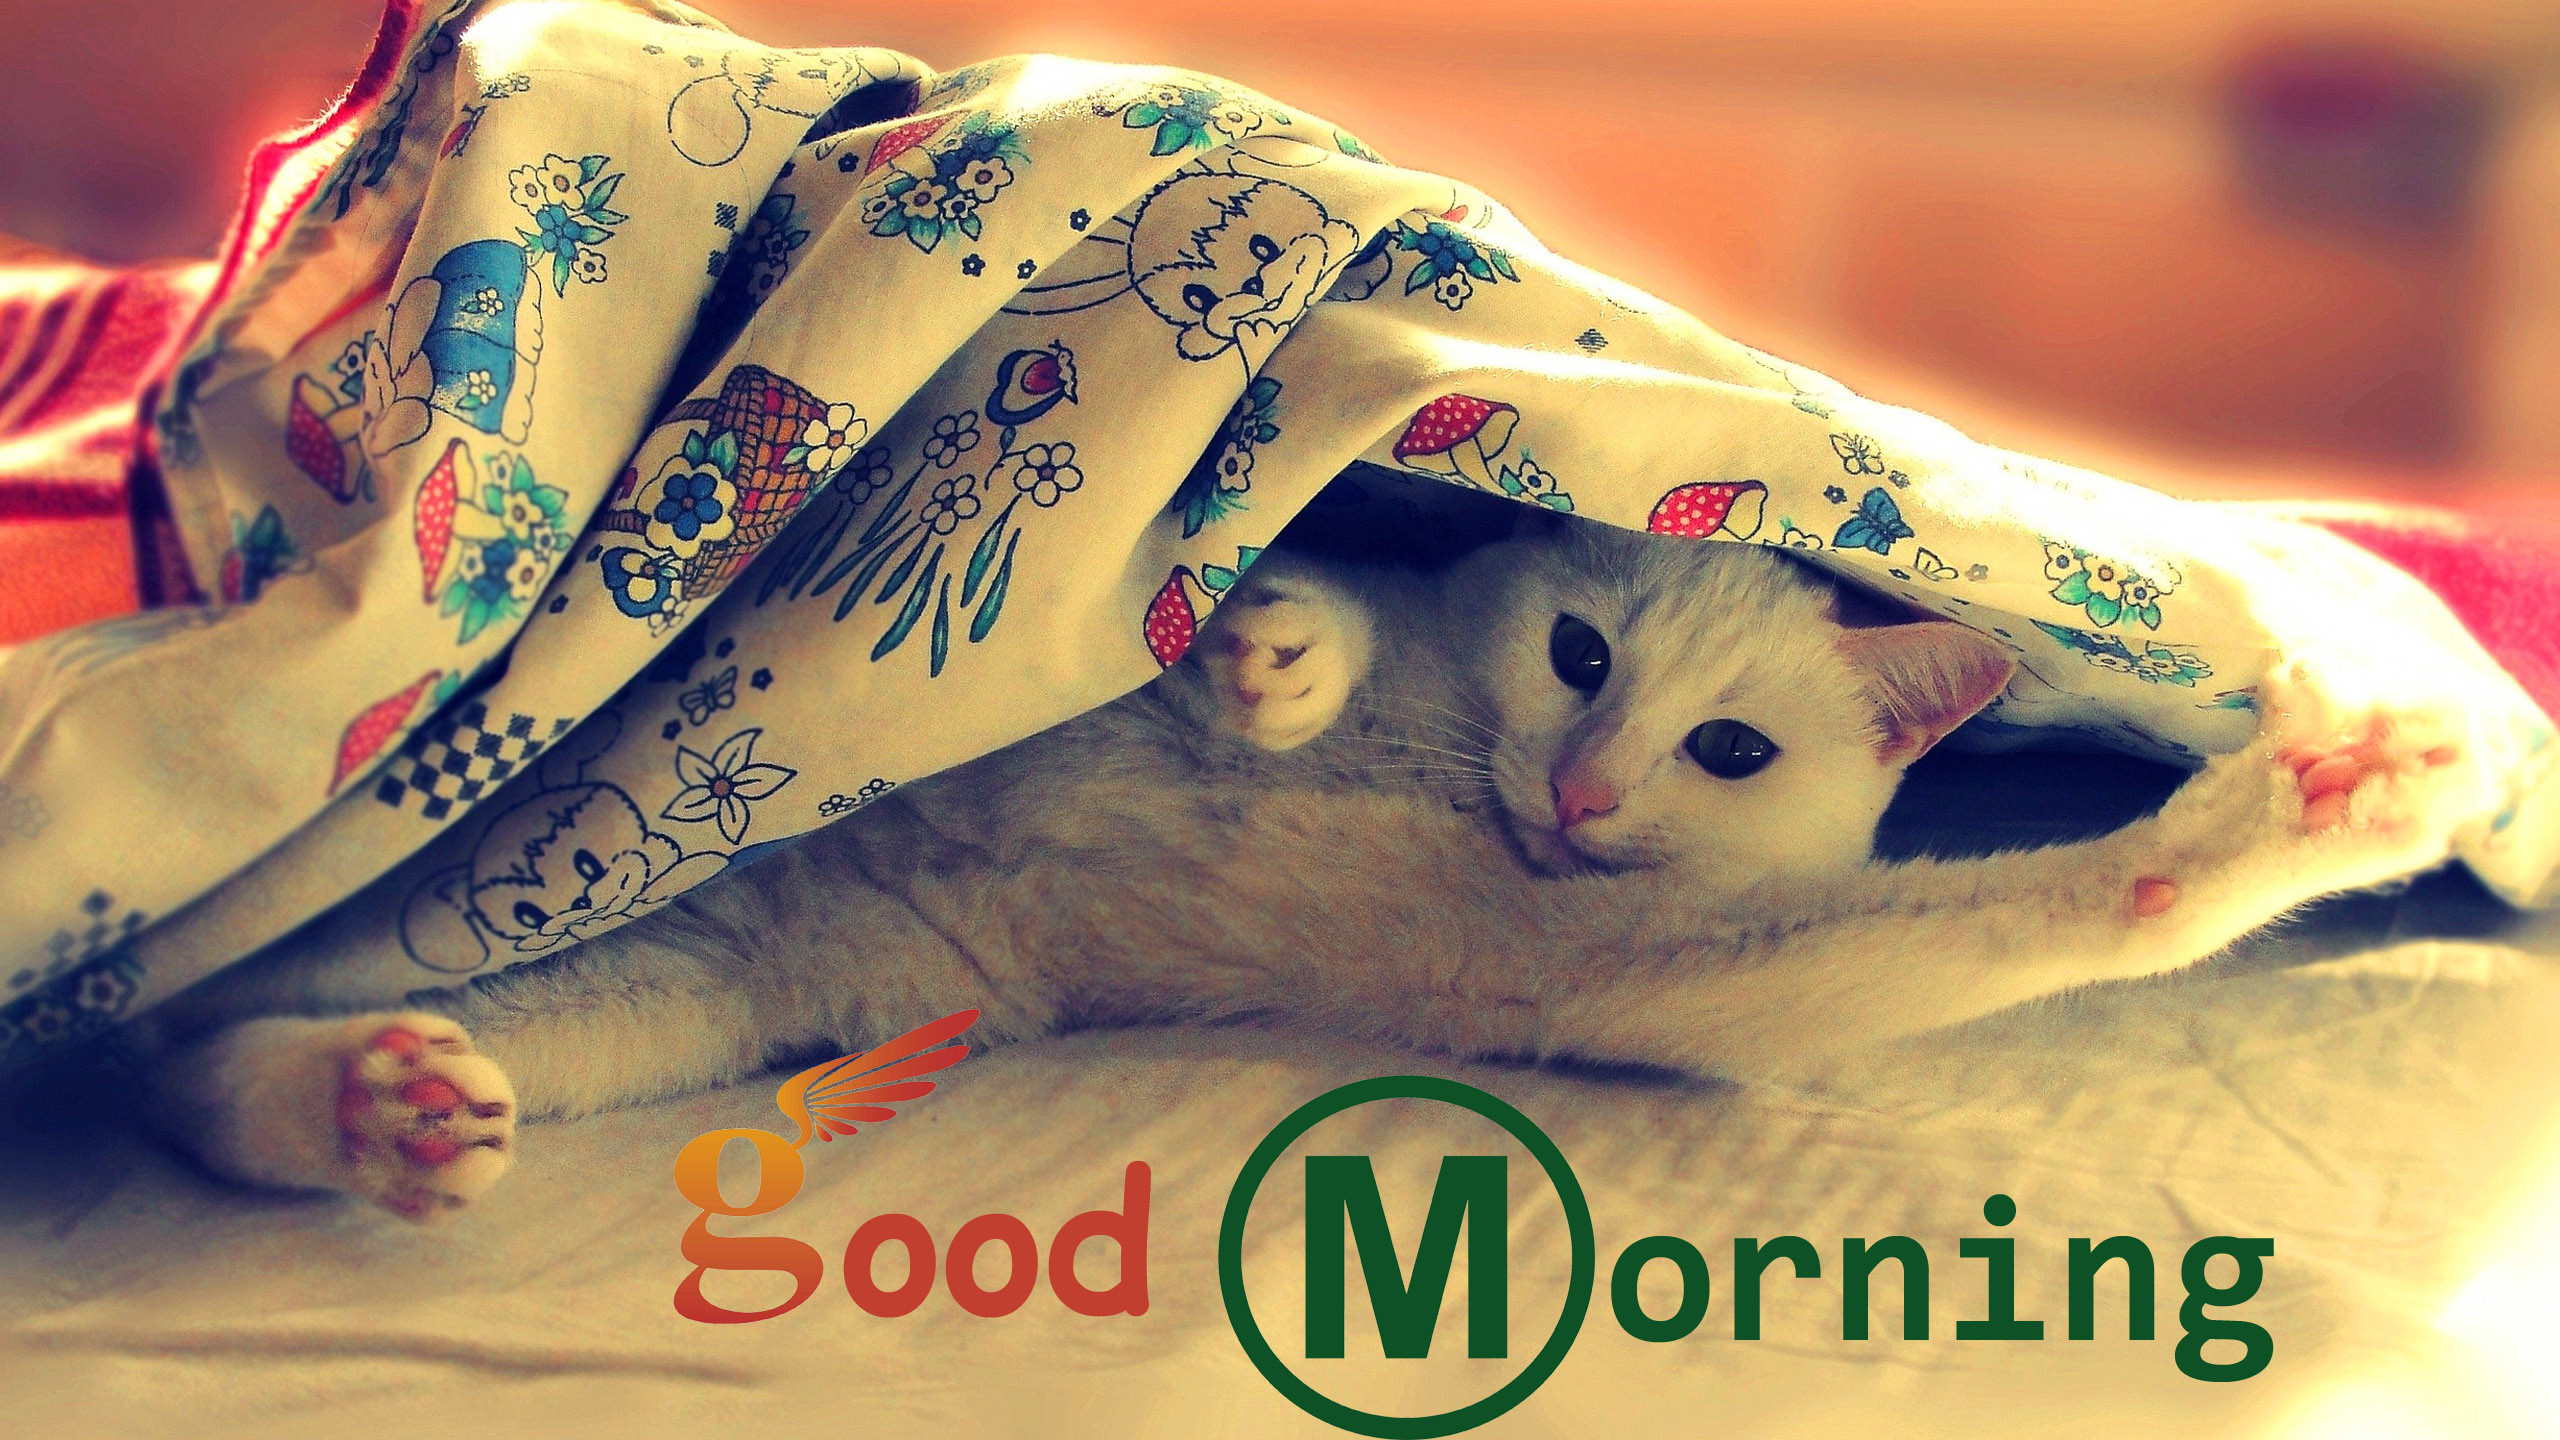 2560x1440 Images of Best Good Morning Wishes hd Wallpapers Free ...